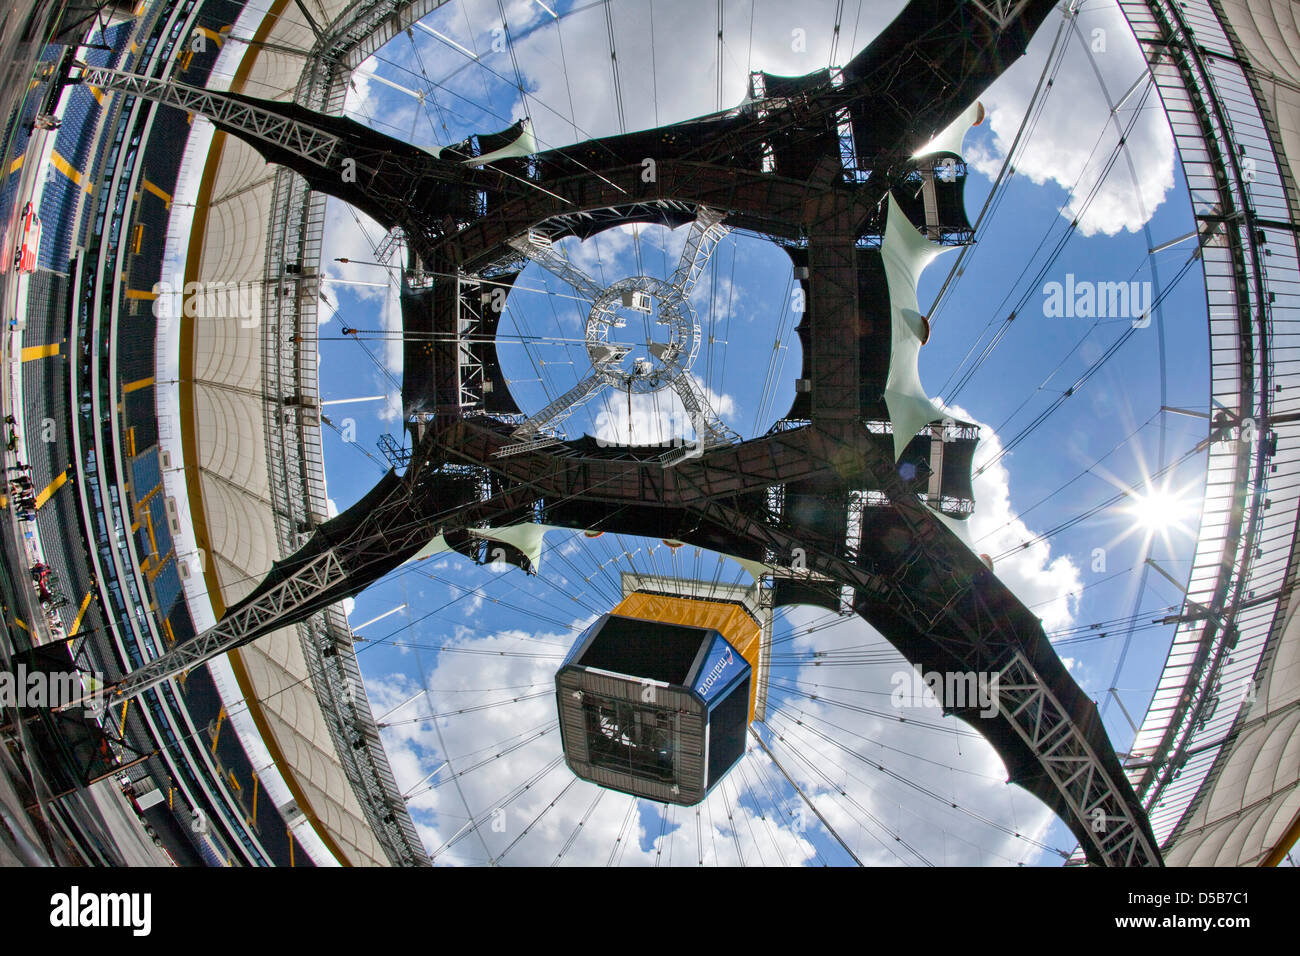 A gigantic round stage is installed for a concert of rock band U2 in Frankfurt am Main, Germany, 08 August 2010. The Irish band will perform here during its '360 degrees tour'. More concerts include Hanover (12 August 2010) and Munich (15 September 2010). Photo: Frank Rumpenhorst Stock Photo